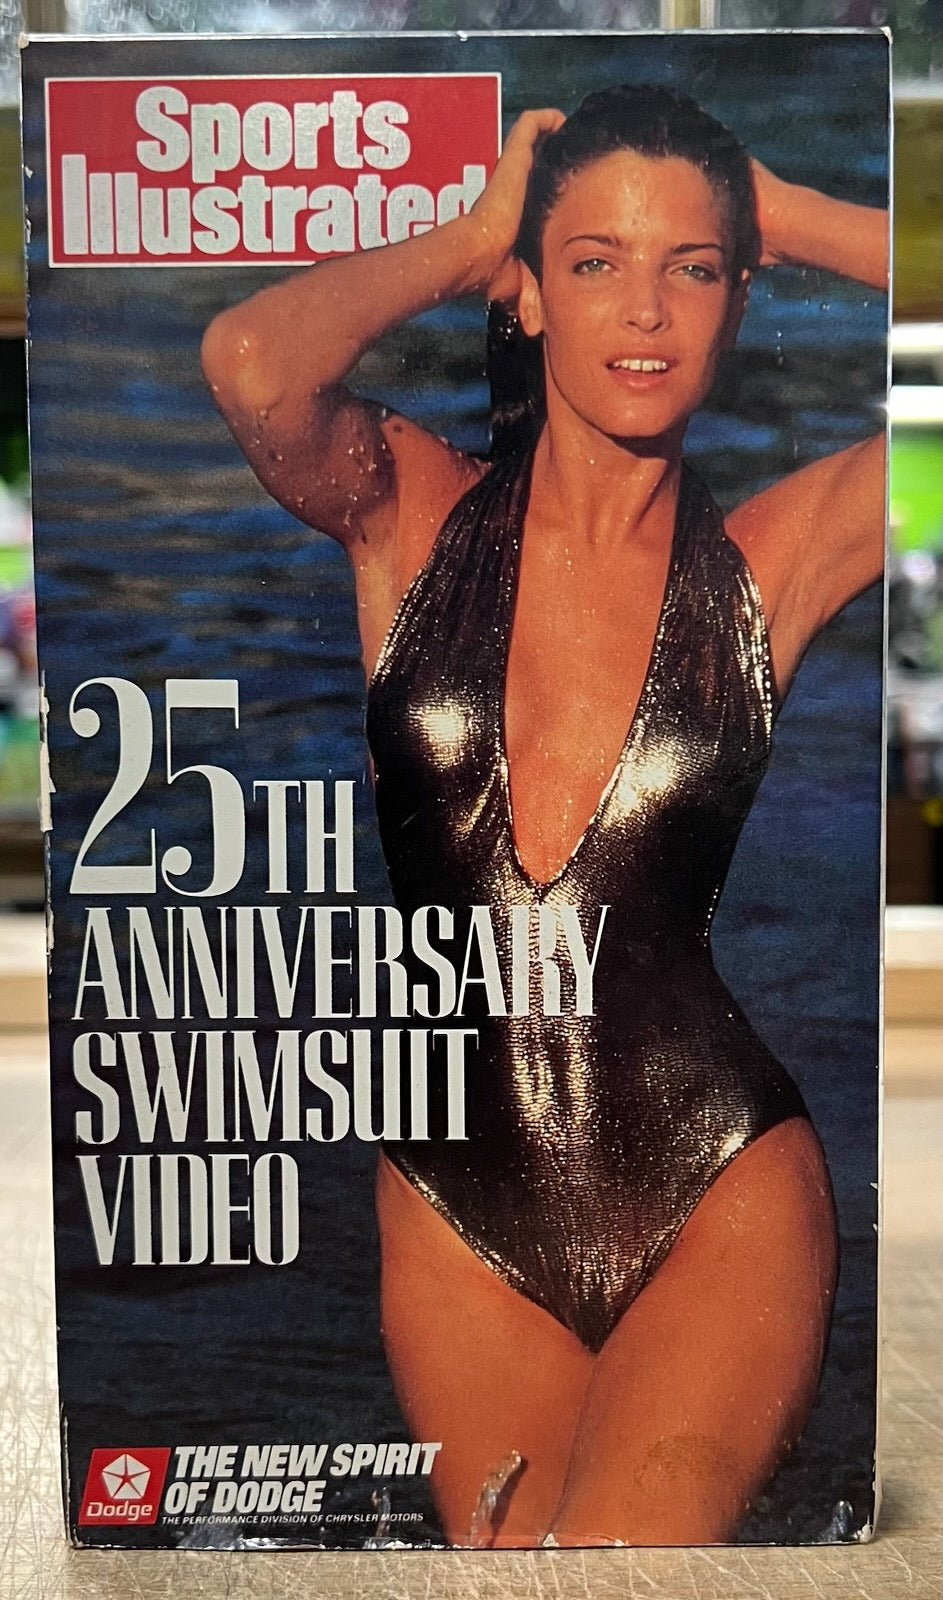 Sports Illustrated: 25th Anniversary Swimsuit